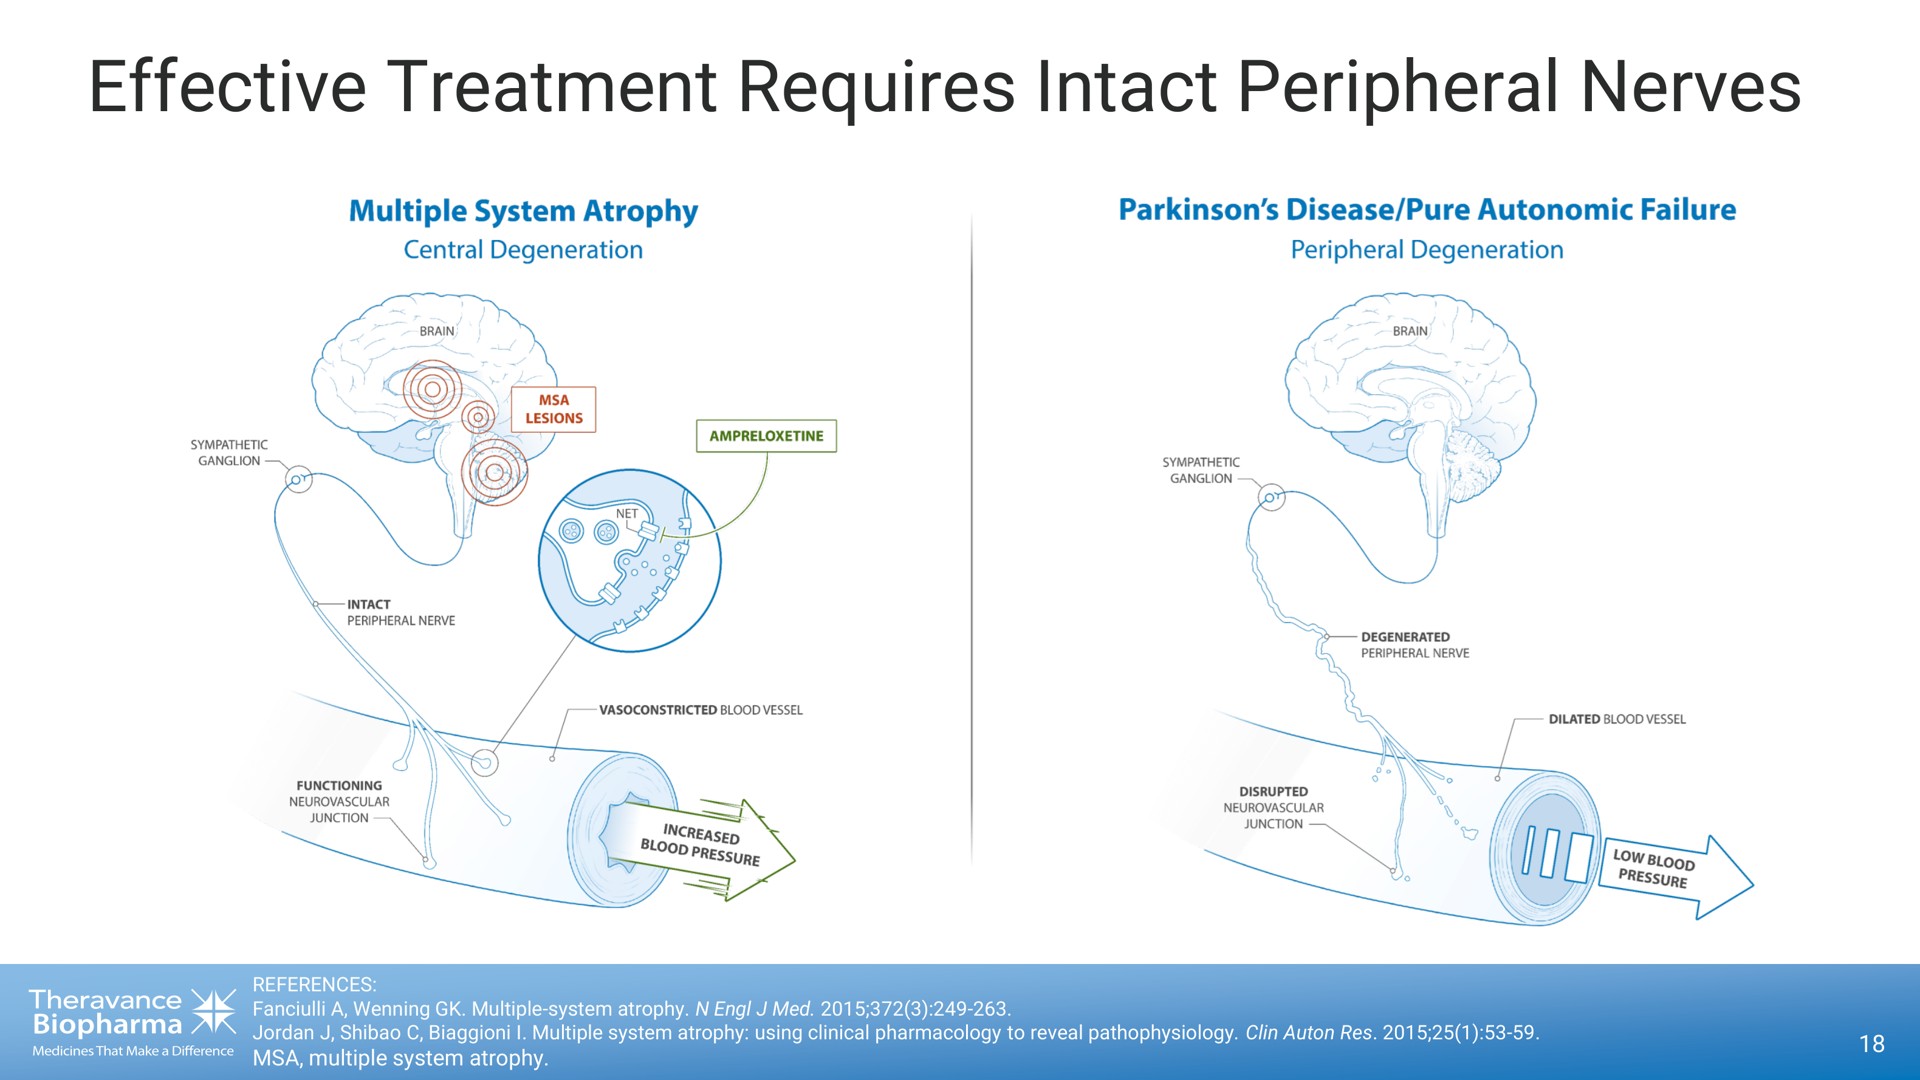 effective treatment requires intact peripheral nerves | Theravance Biopharma